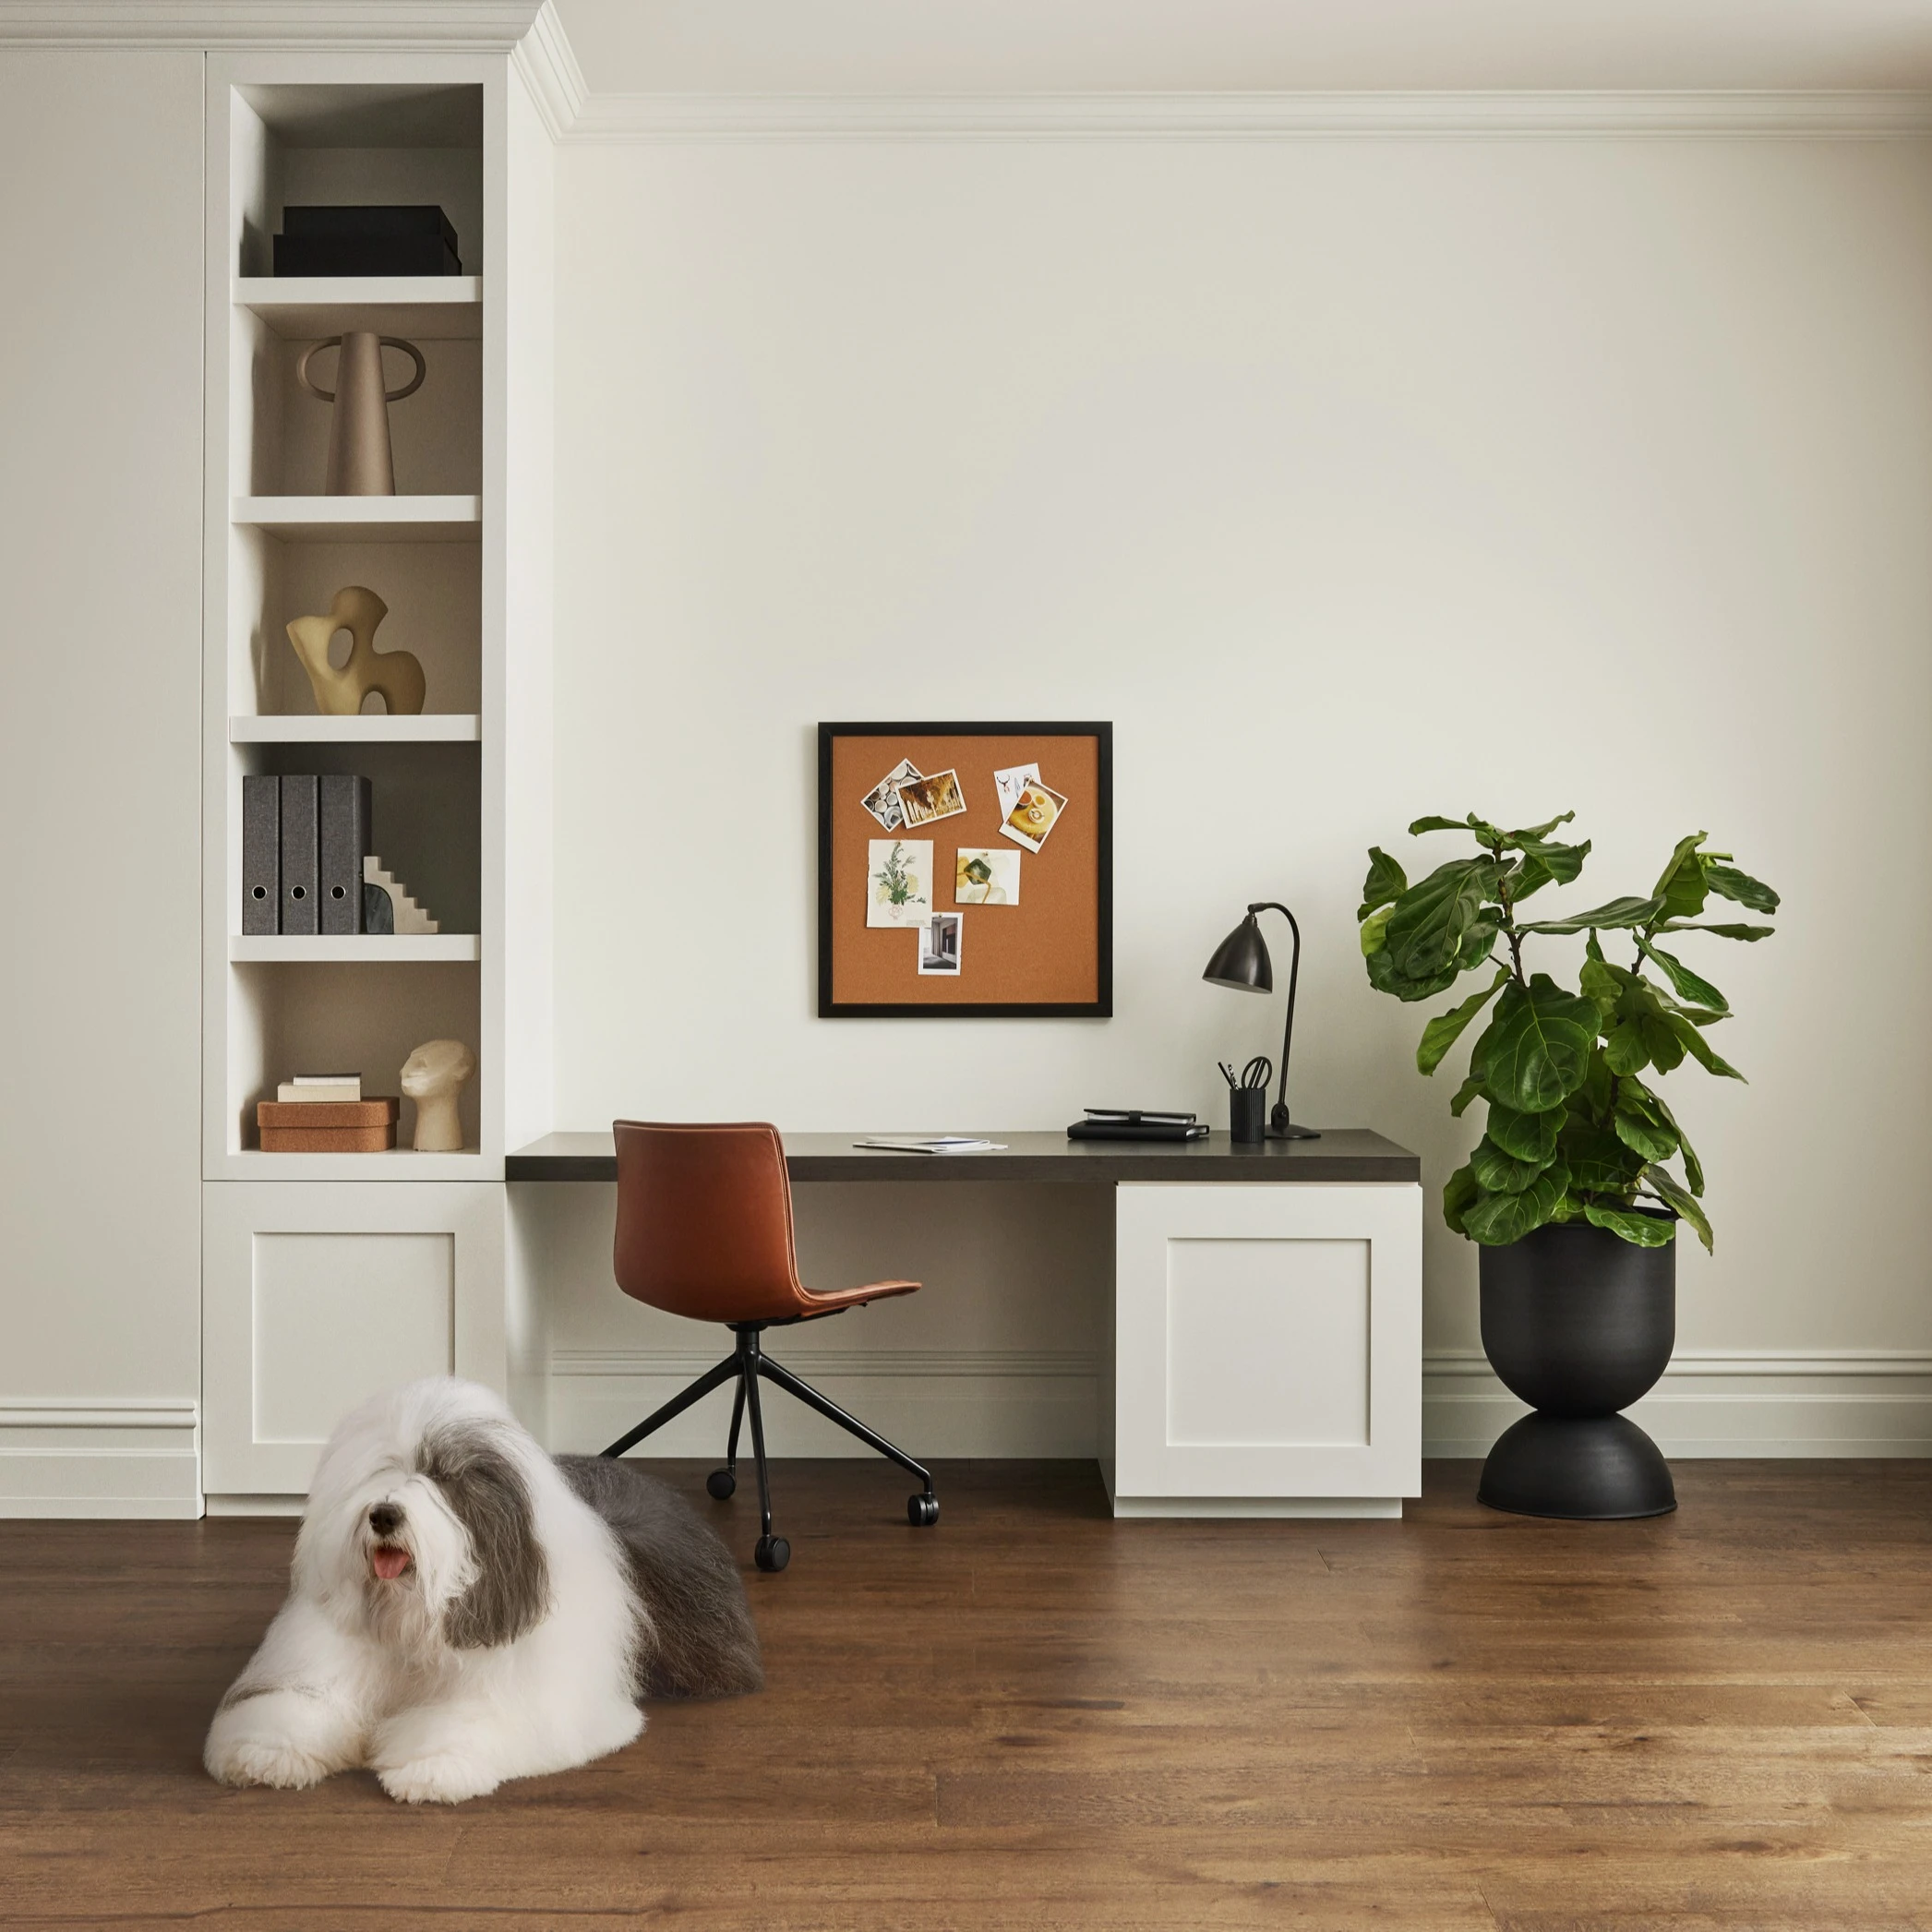 Desk with chair and plant featured in distance against wall with built-in shelves. Dulux dog on floor.